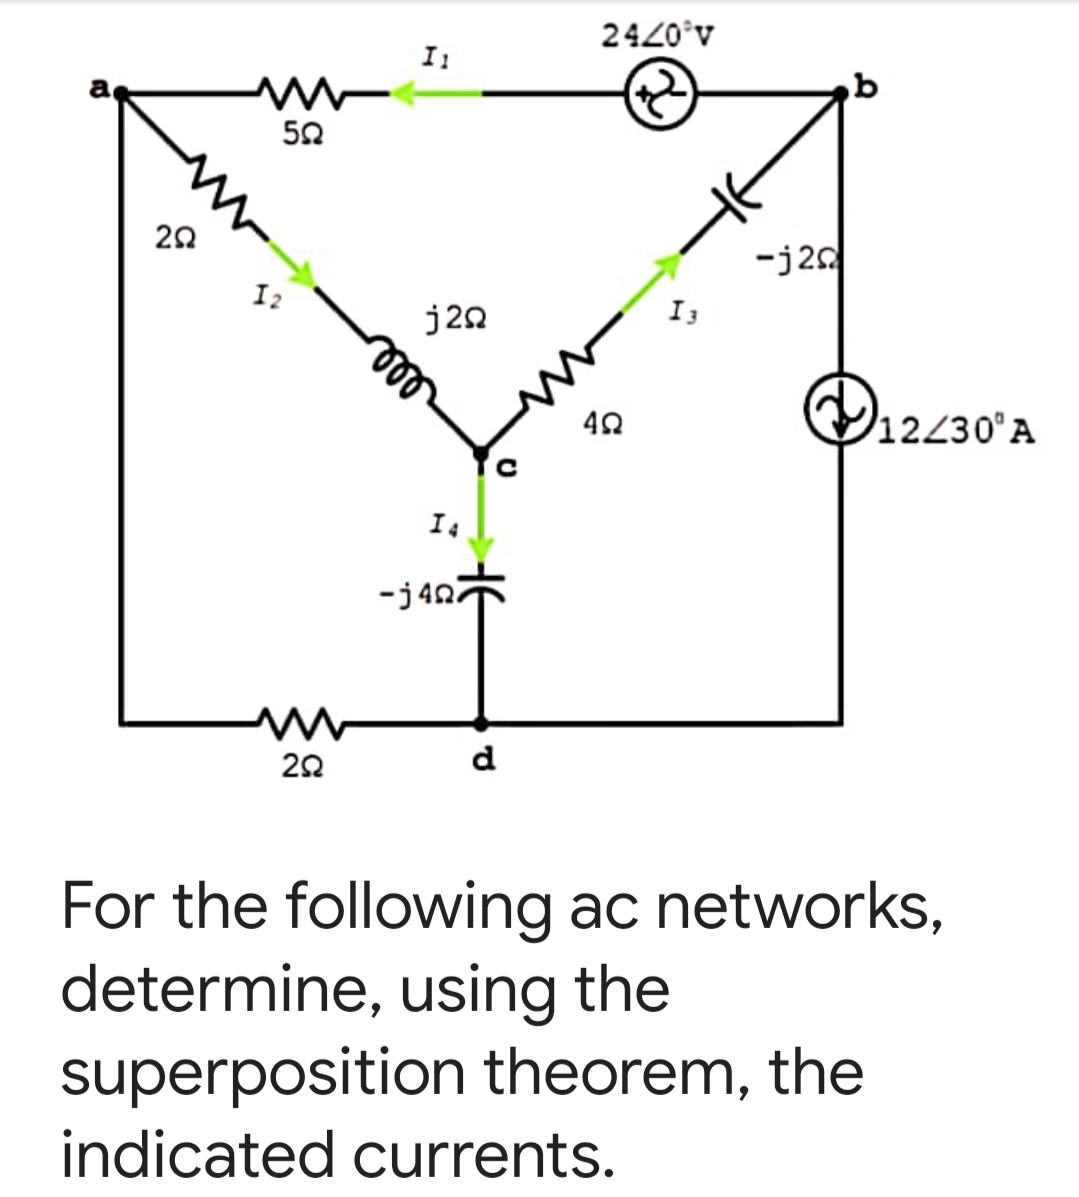 2420°v
-j20
I2
I3
j20
le
12430°A
30'a
I4
-j427
d
For the following ac networks,
determine, using the
superposition theorem, the
indicated currents.
